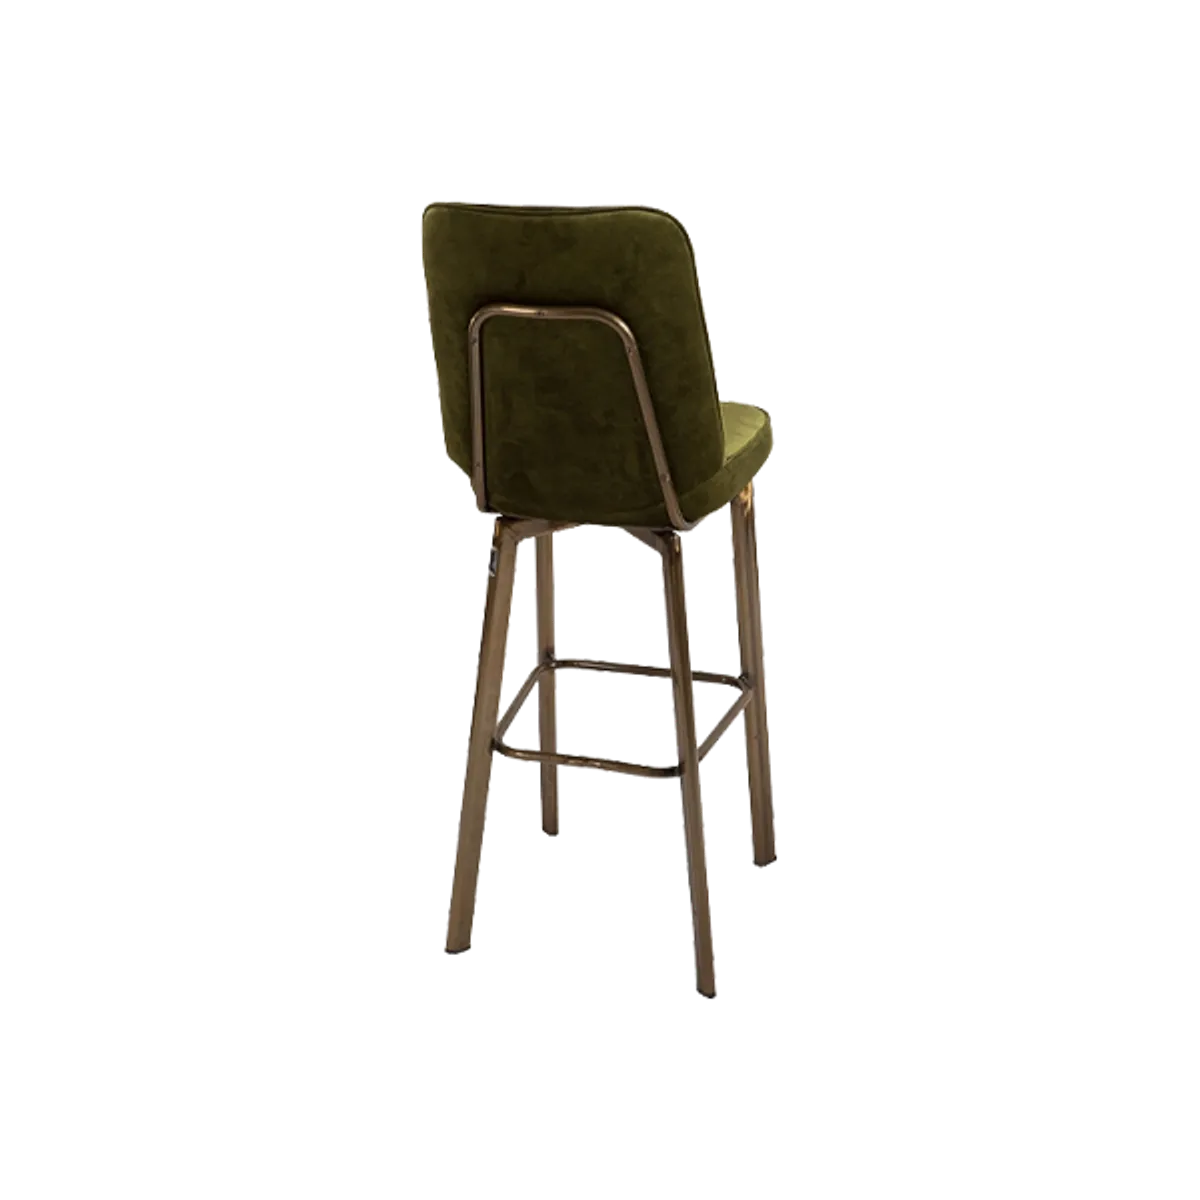 Galley Bar Stool Feature Metal Frame Inside Out Contracts